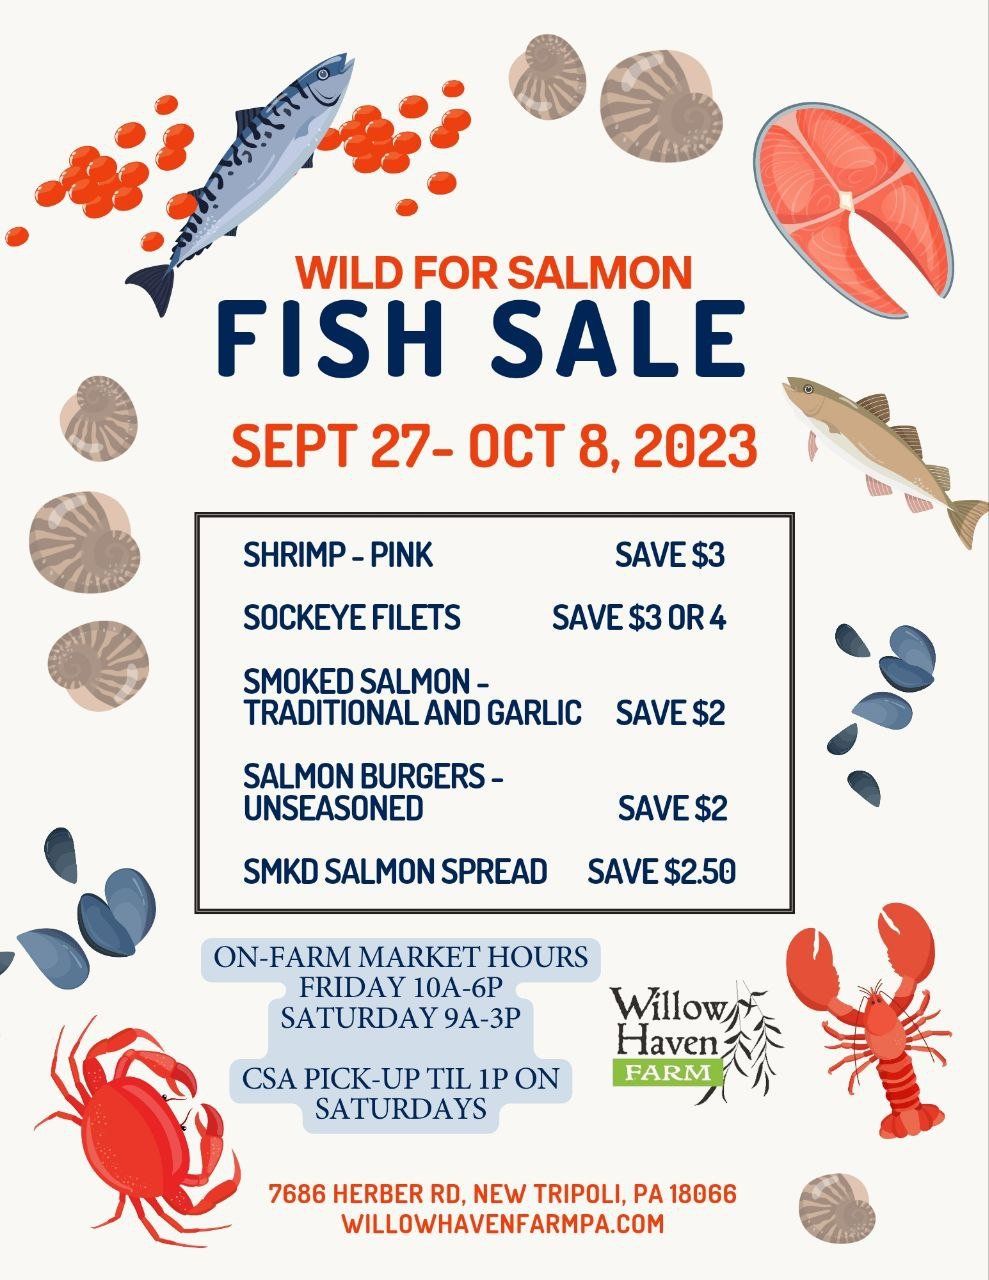 Previous Happening: Wild for Salmon Sale + Enjoy Fall veggies and fruits!